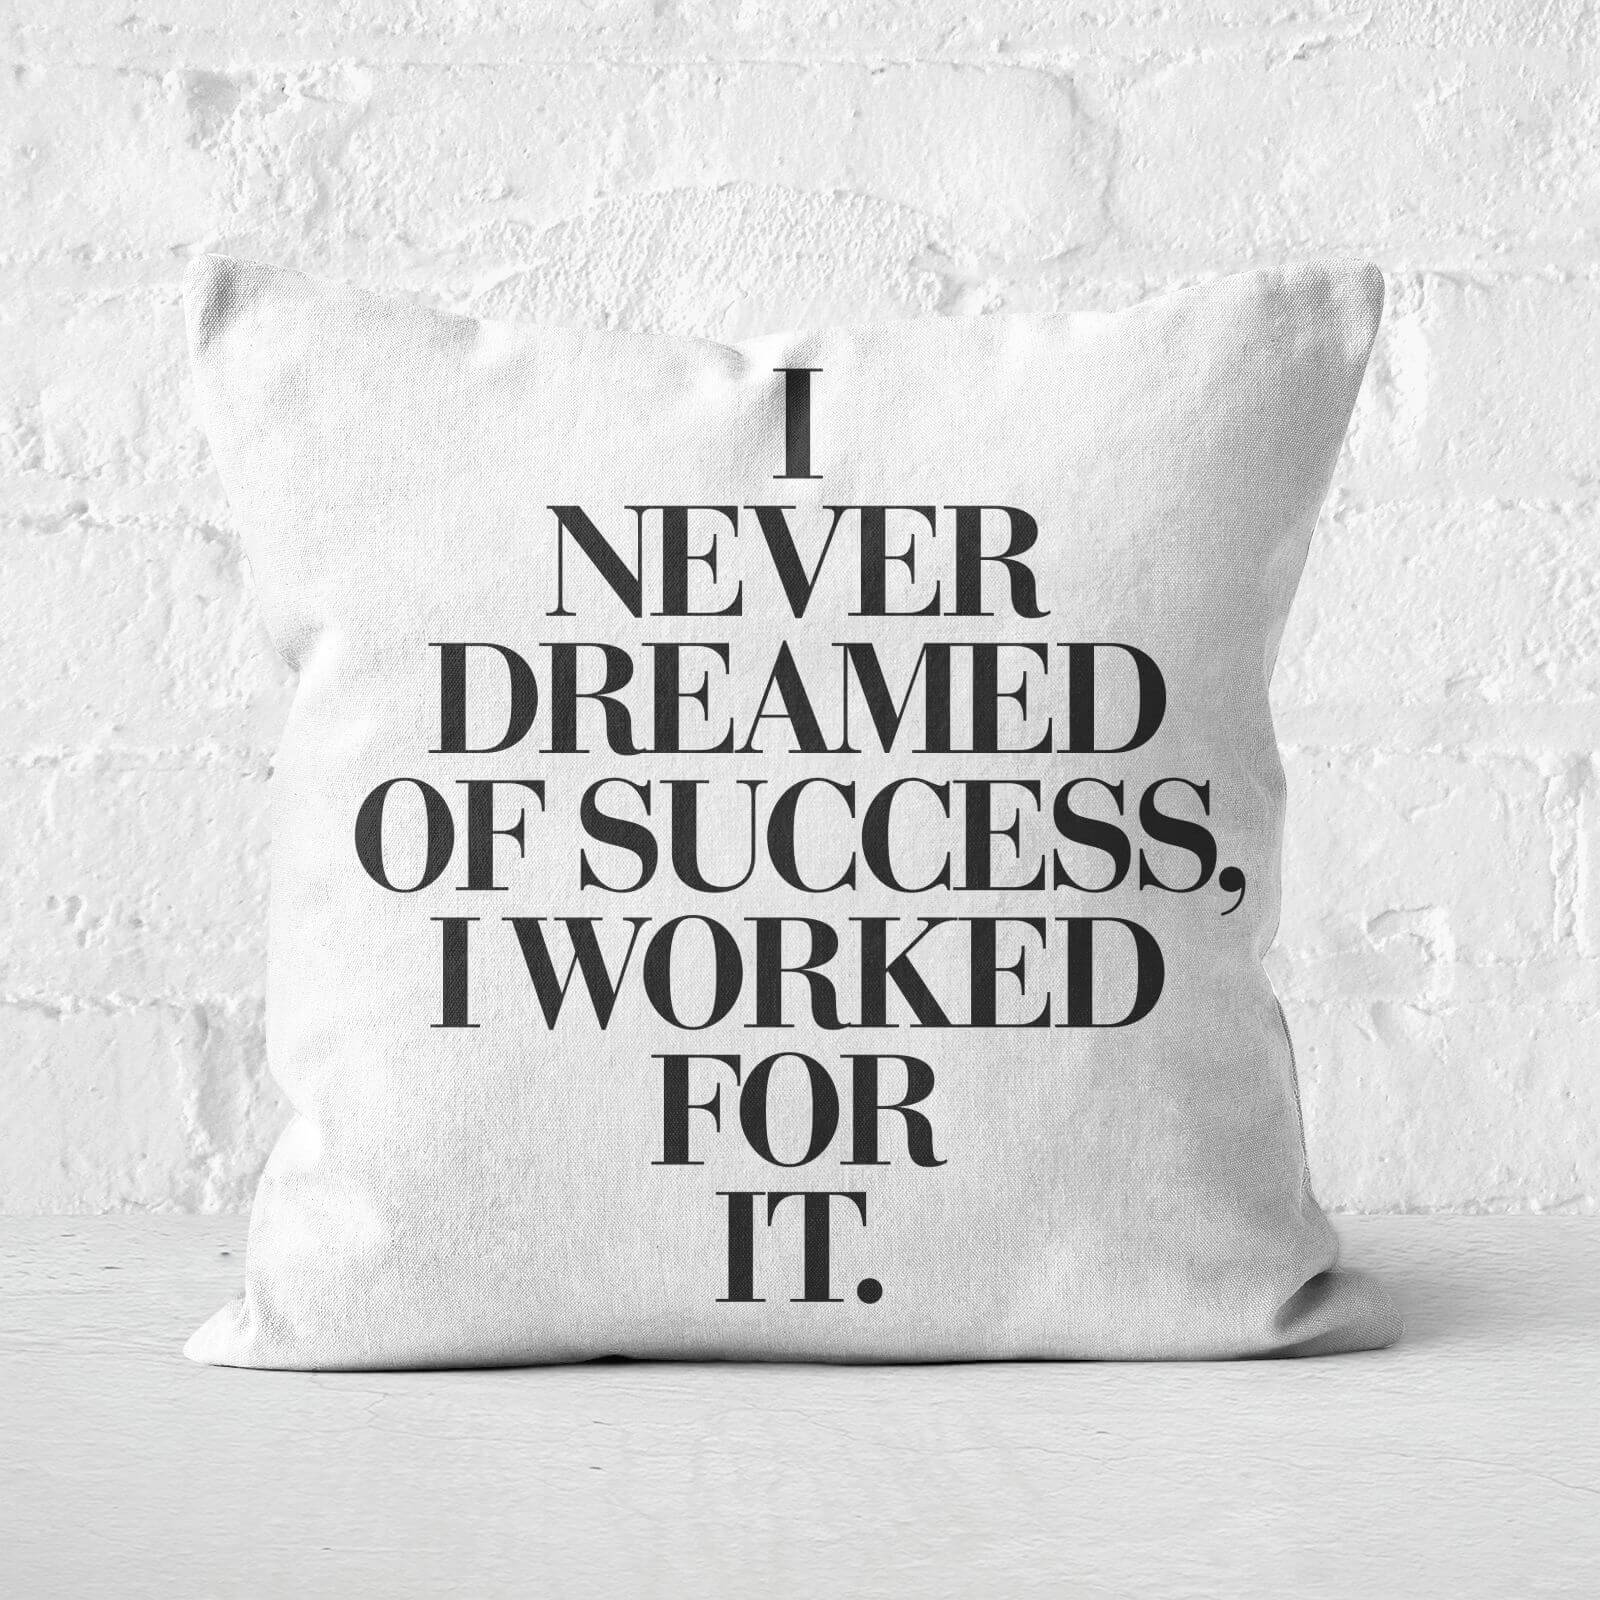 The Motivated Type I Never Dreamed Of Success, I Worked For It Square Cushion - 60x60cm - Soft Touch